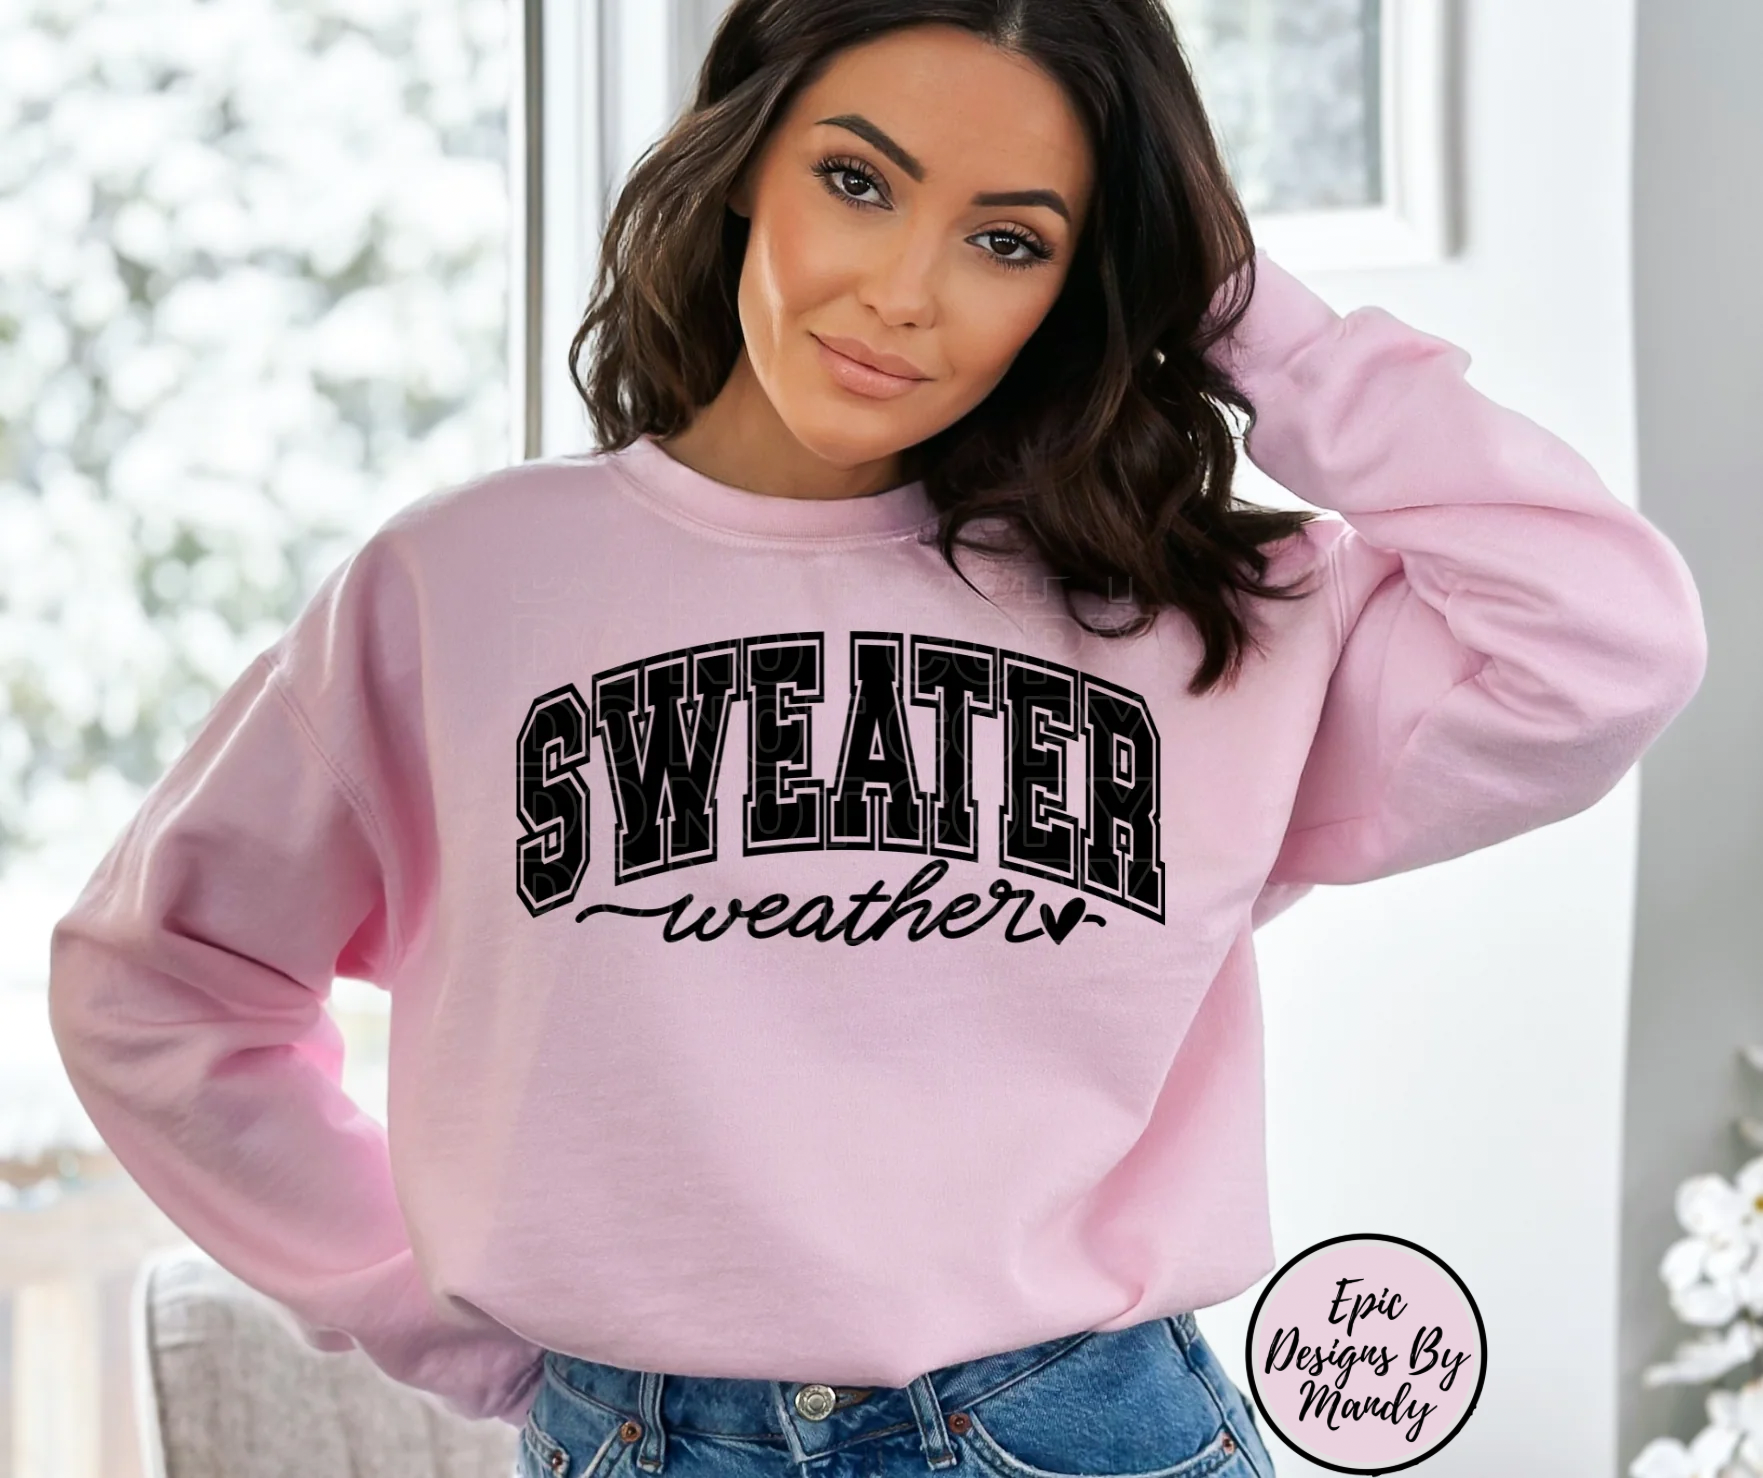 Sweater weather heart